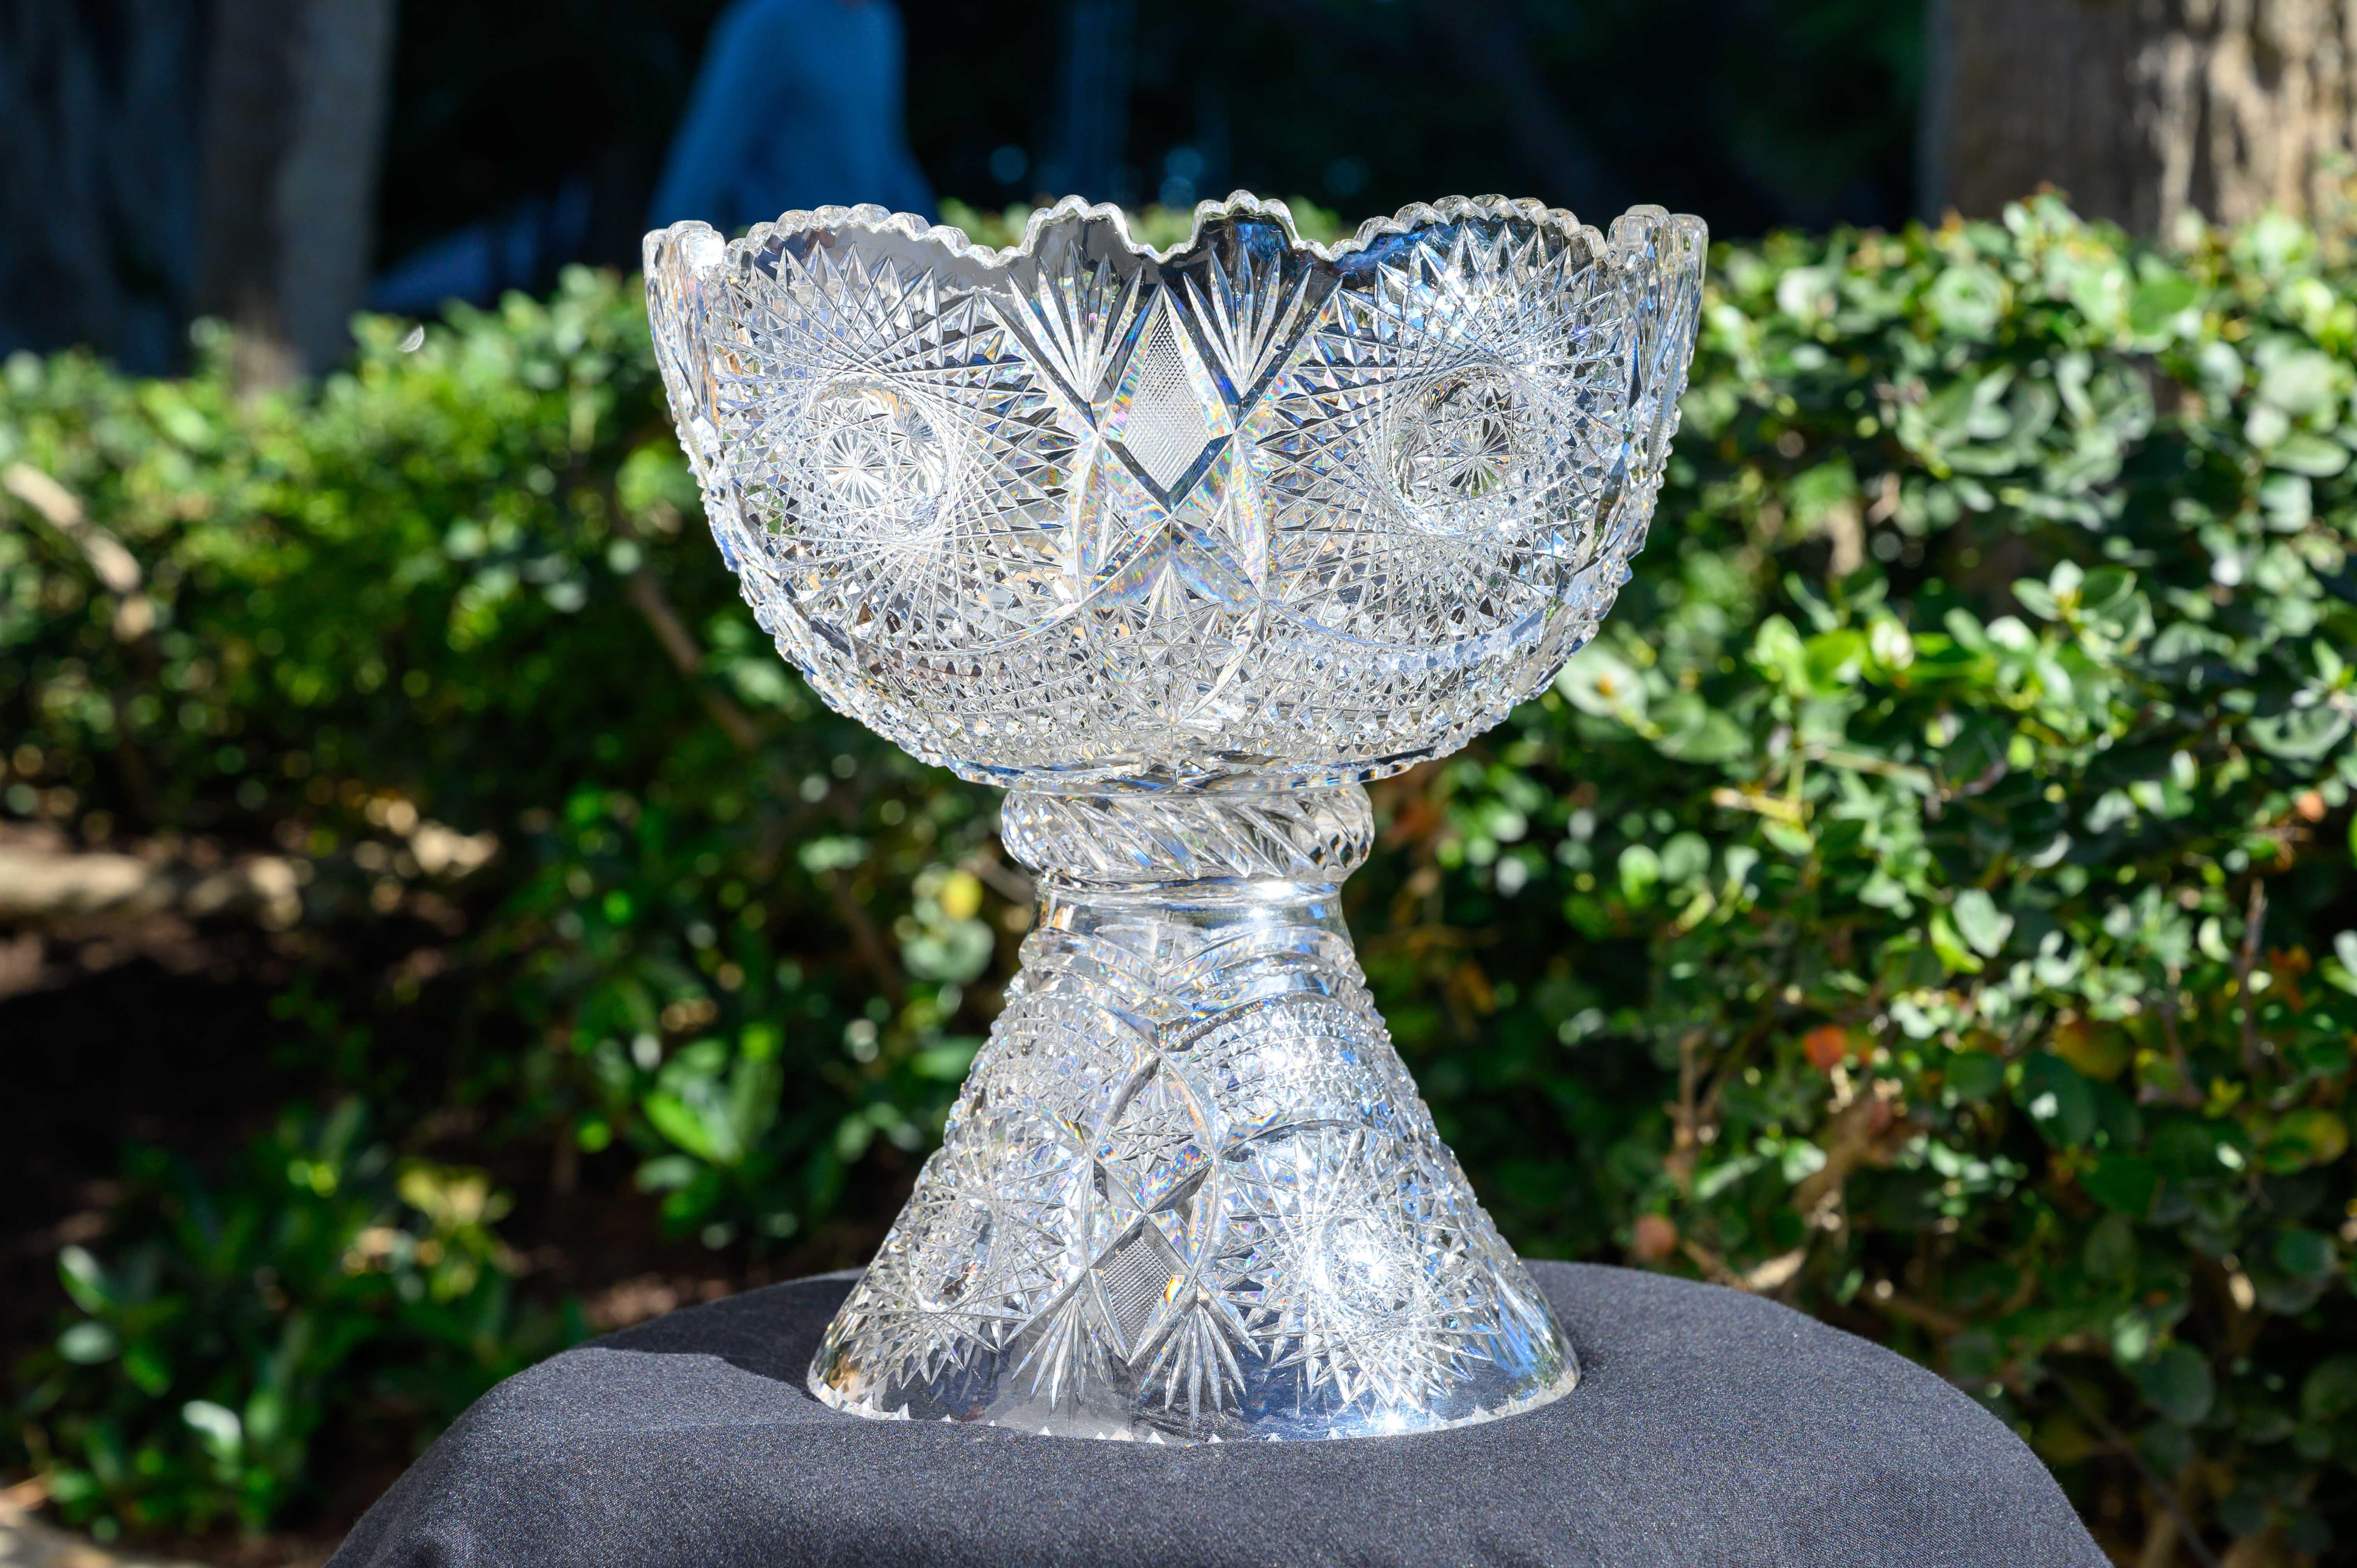 Belle Époque Baccarat Attrib. French Diamond Cut Crystal Footed Bowl or Bowl on a Pedestal For Sale